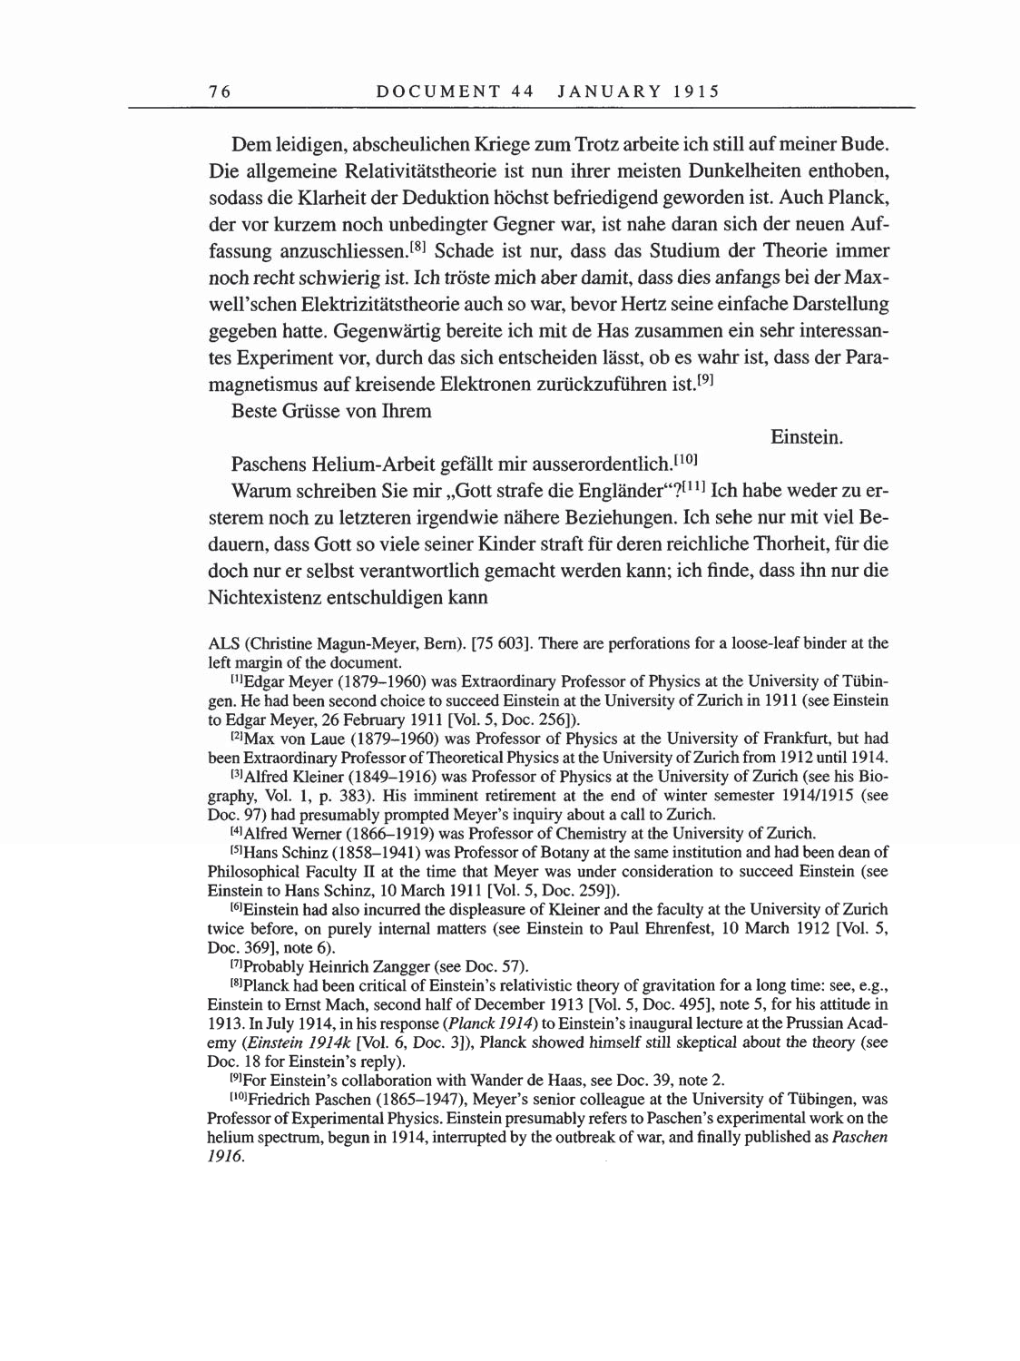 Volume 8, Part A: The Berlin Years: Correspondence 1914-1917 page 76